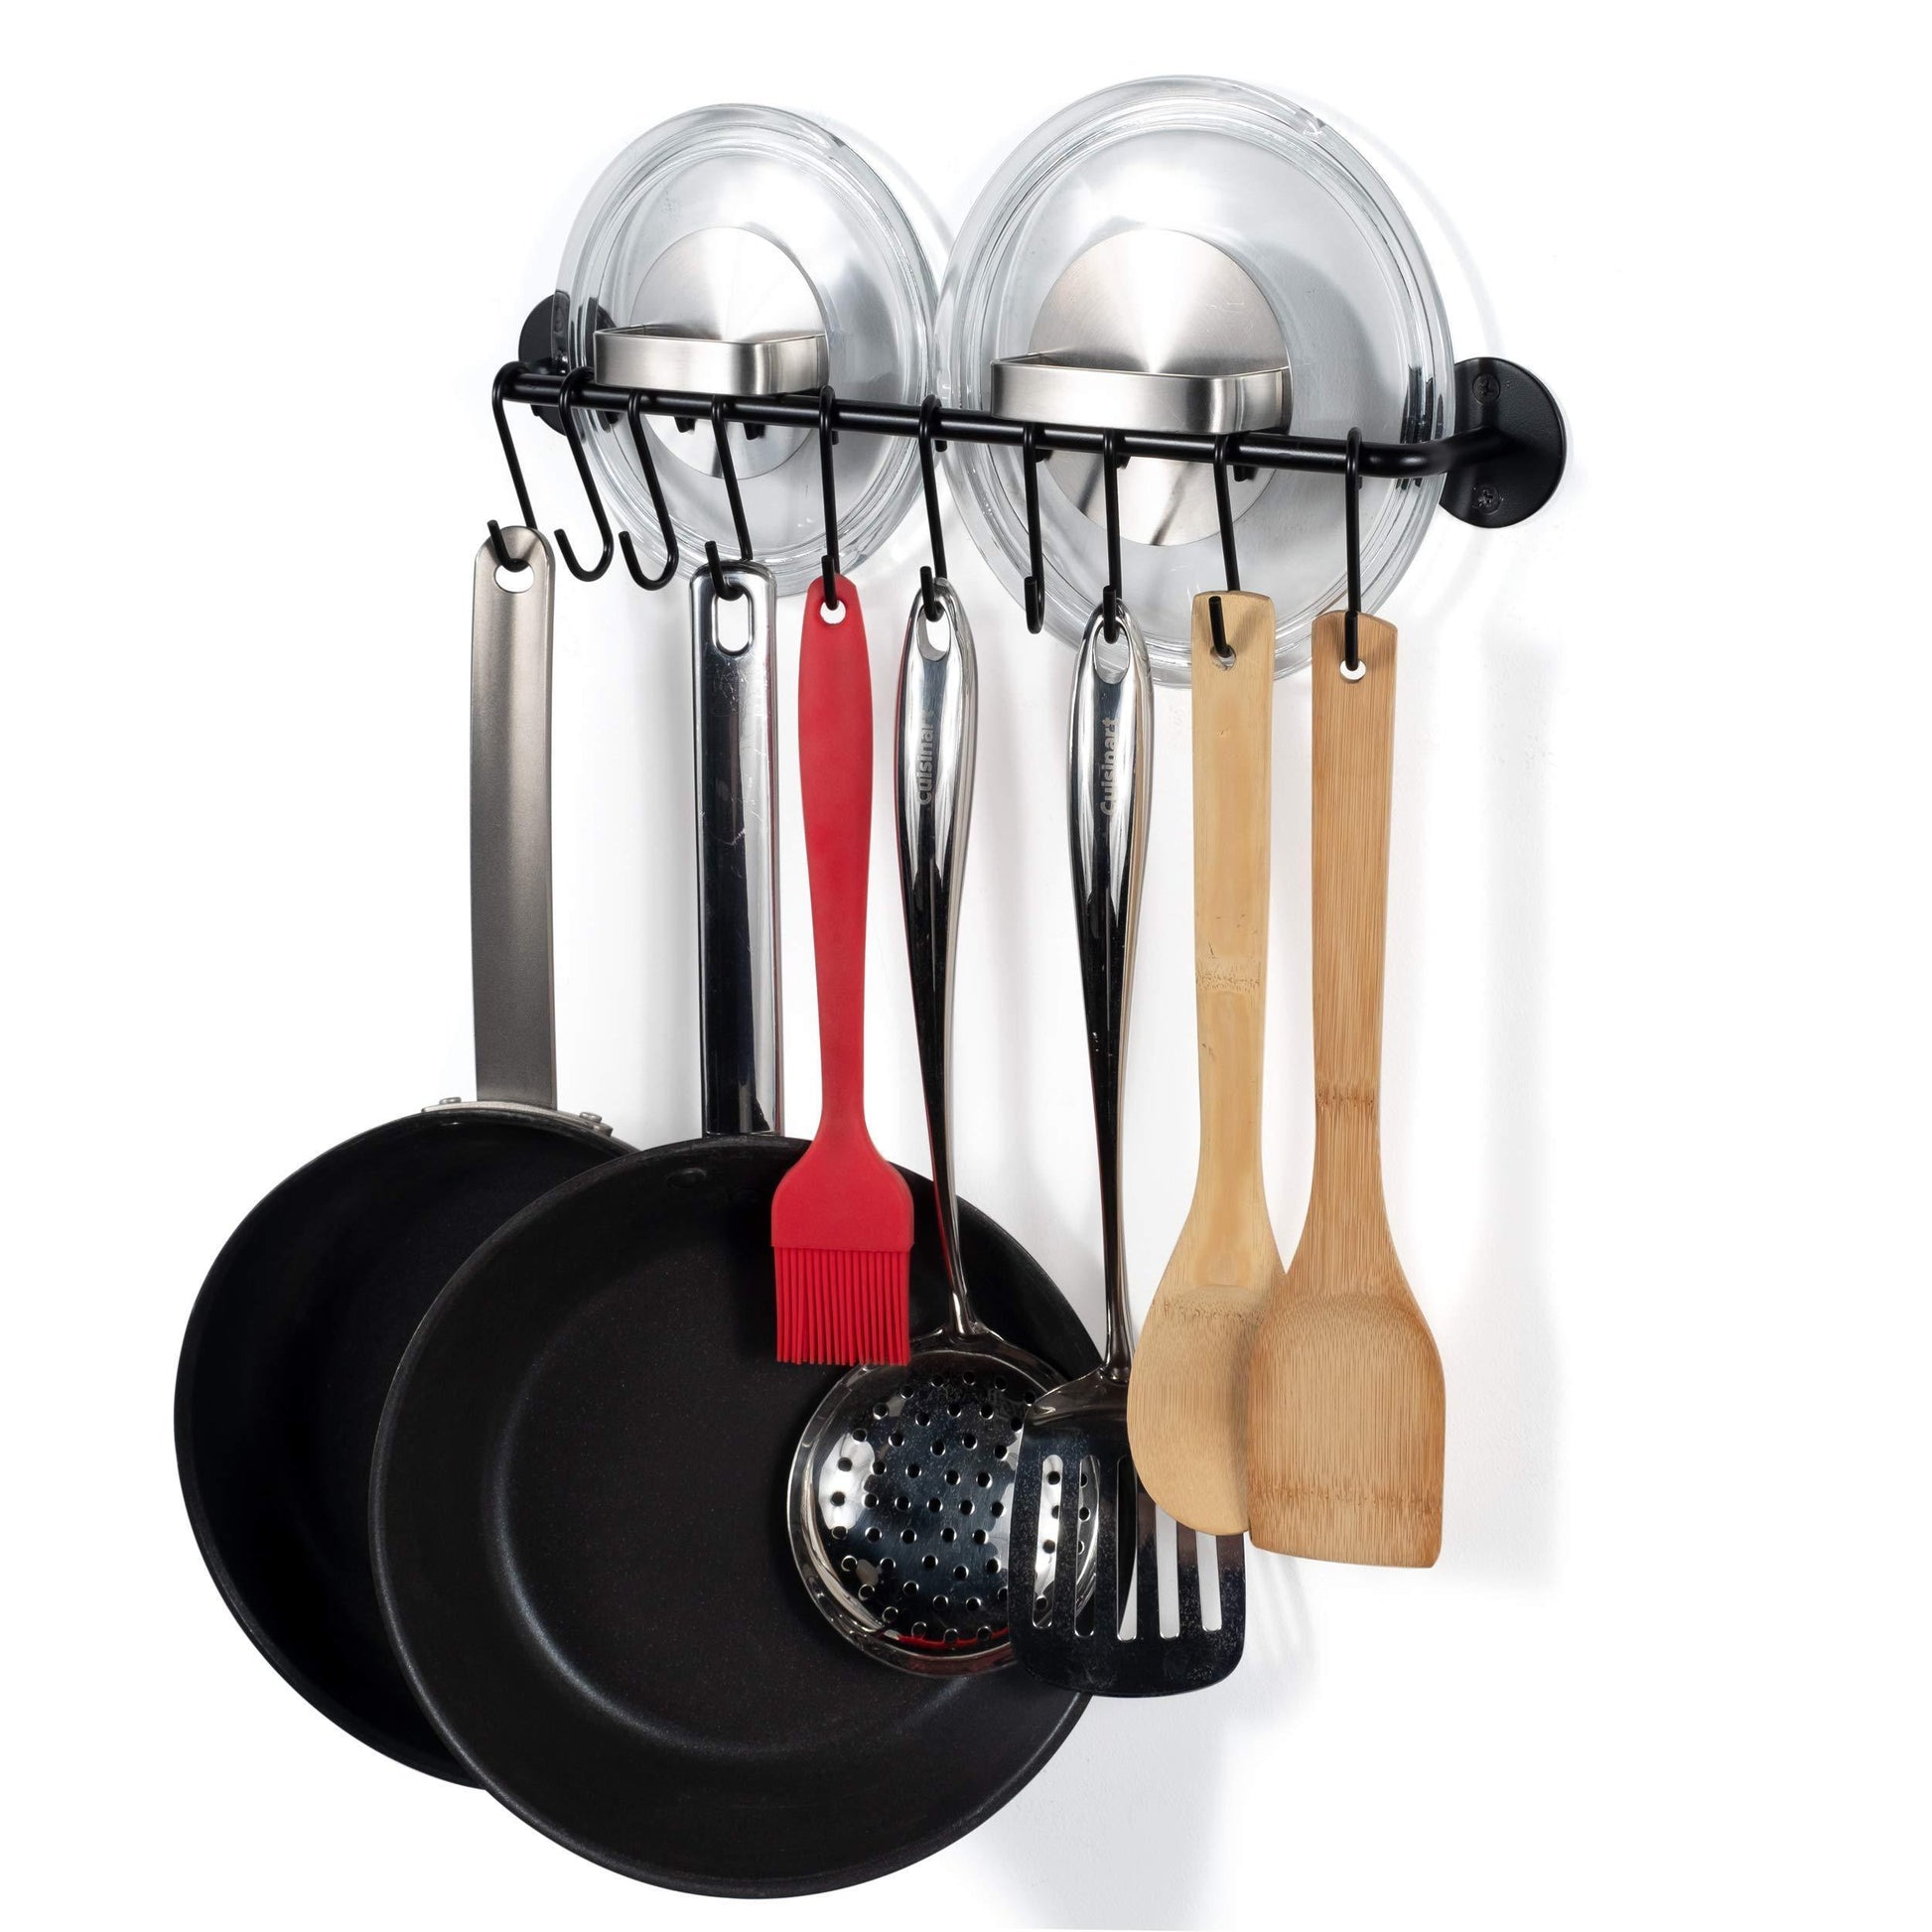 Discover the wallniture gourmet kitchen rail rack pot pan lid organizer and 10 hooks 16 inch black